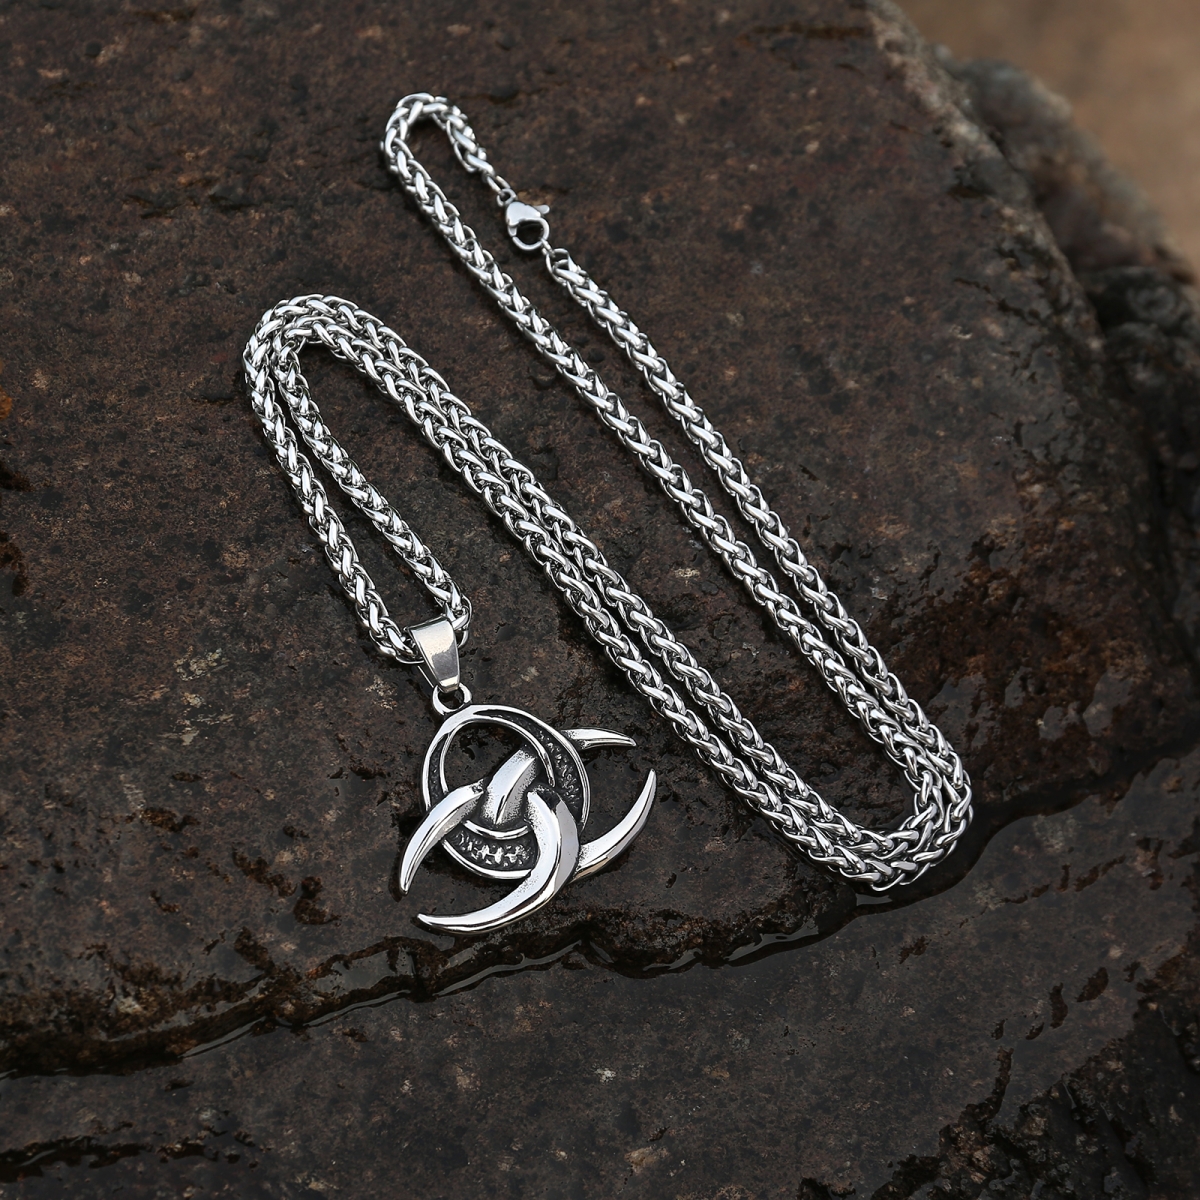 Triple Horn Necklace US$3.5/PC-NORSECOLLECTION- Viking Jewelry,Viking Necklace,Viking Bracelet,Viking Rings,Viking Mugs,Viking Accessories,Viking Crafts